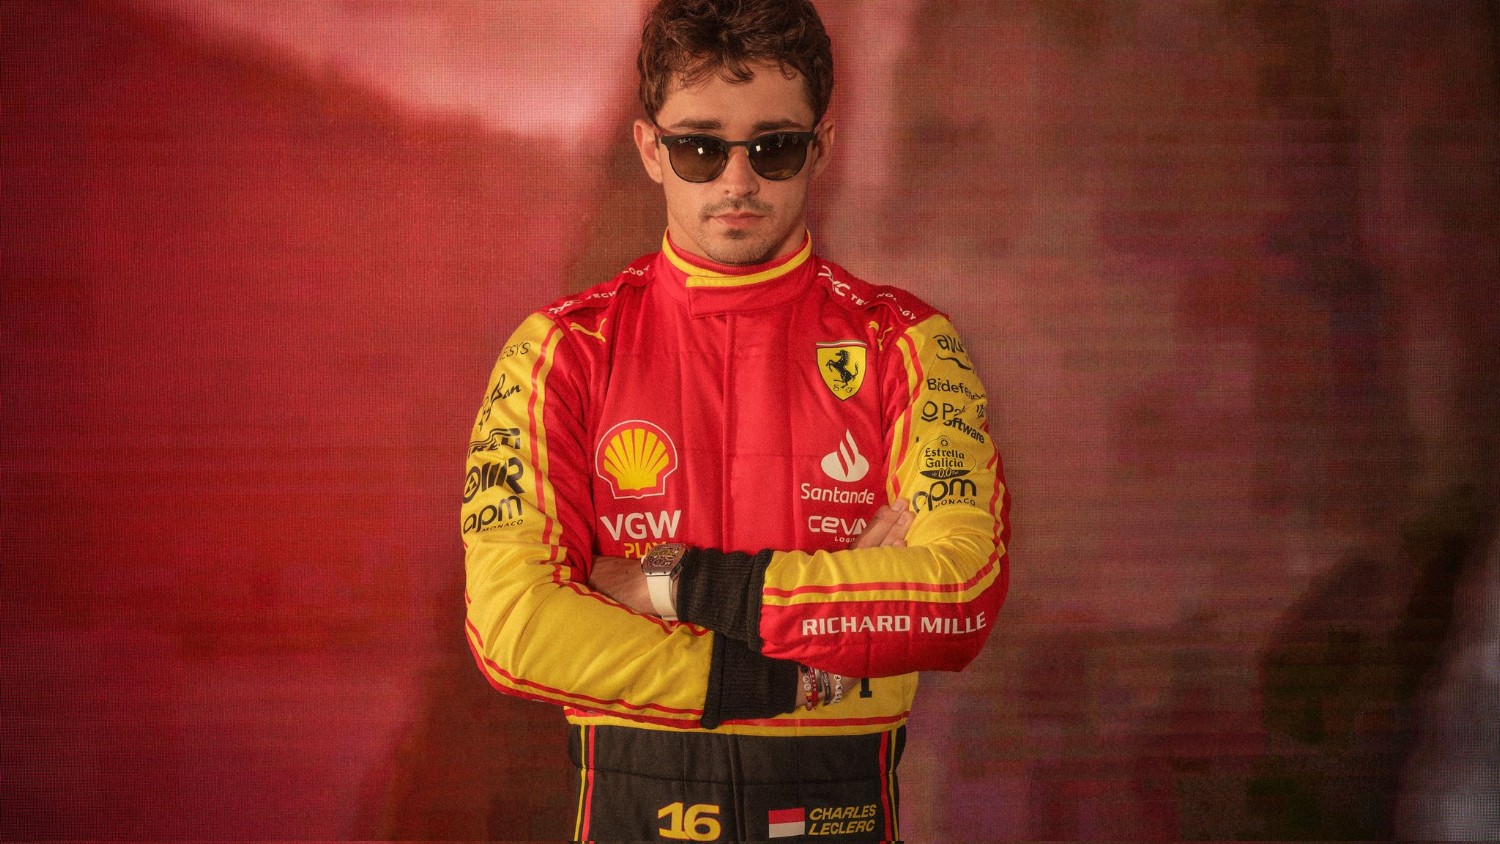 Charles Leclerc - Ferrari livery for the 2023 Italian GP at Monza